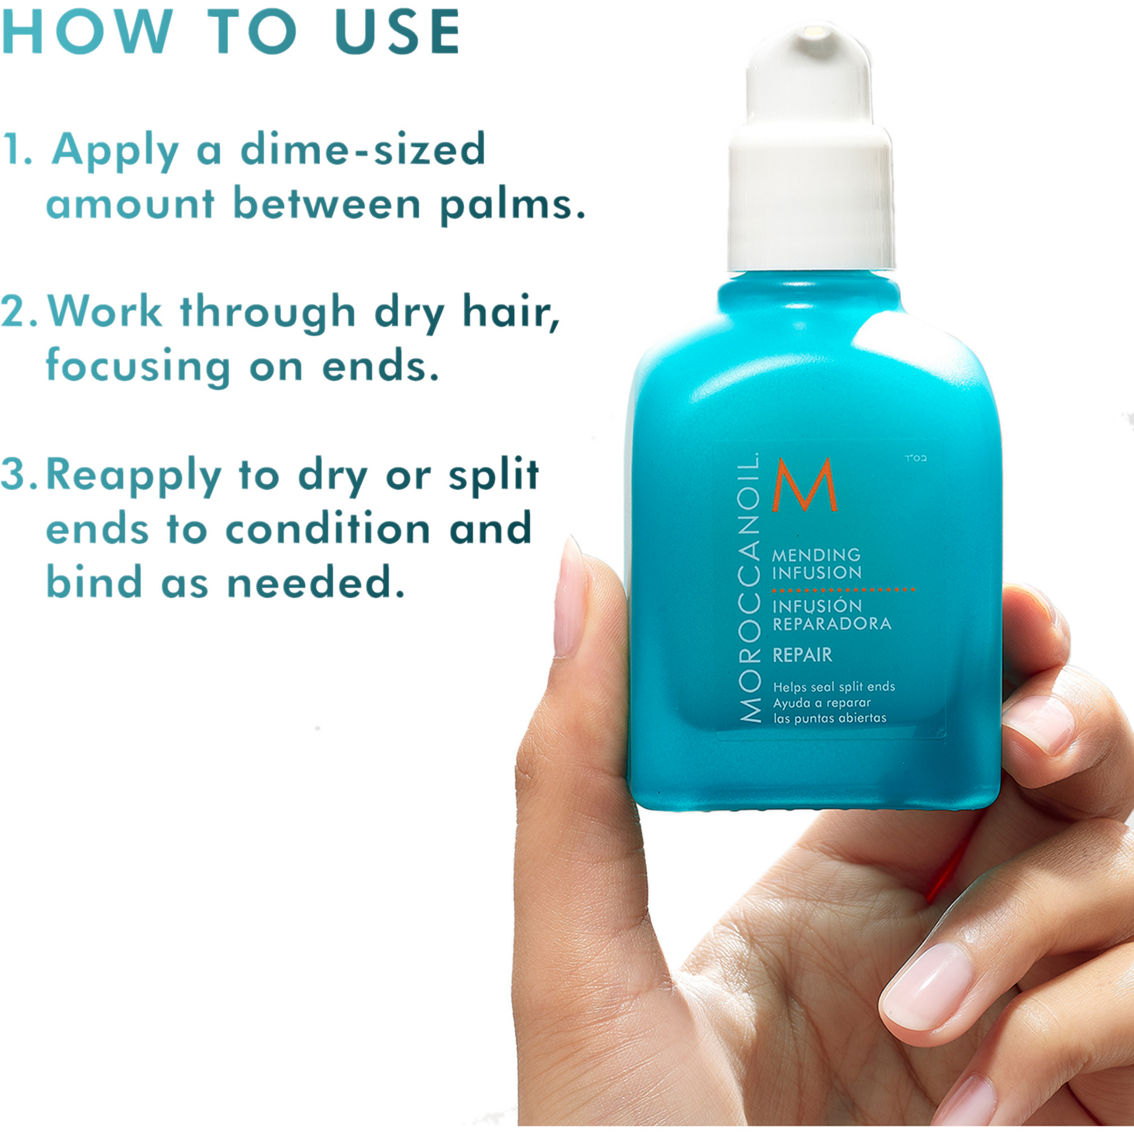 Moroccanoil Mending Infusion 2.5 oz. - Image 2 of 3